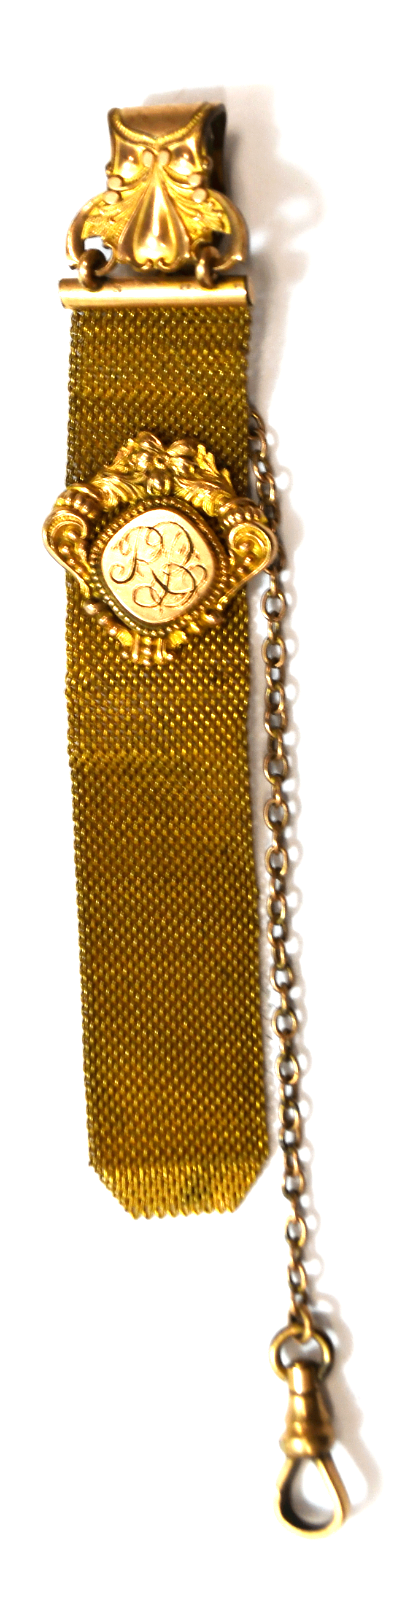 Gold Filled Pocket Watch 5" Chain 4-5/8" 24mm Mesh Clip